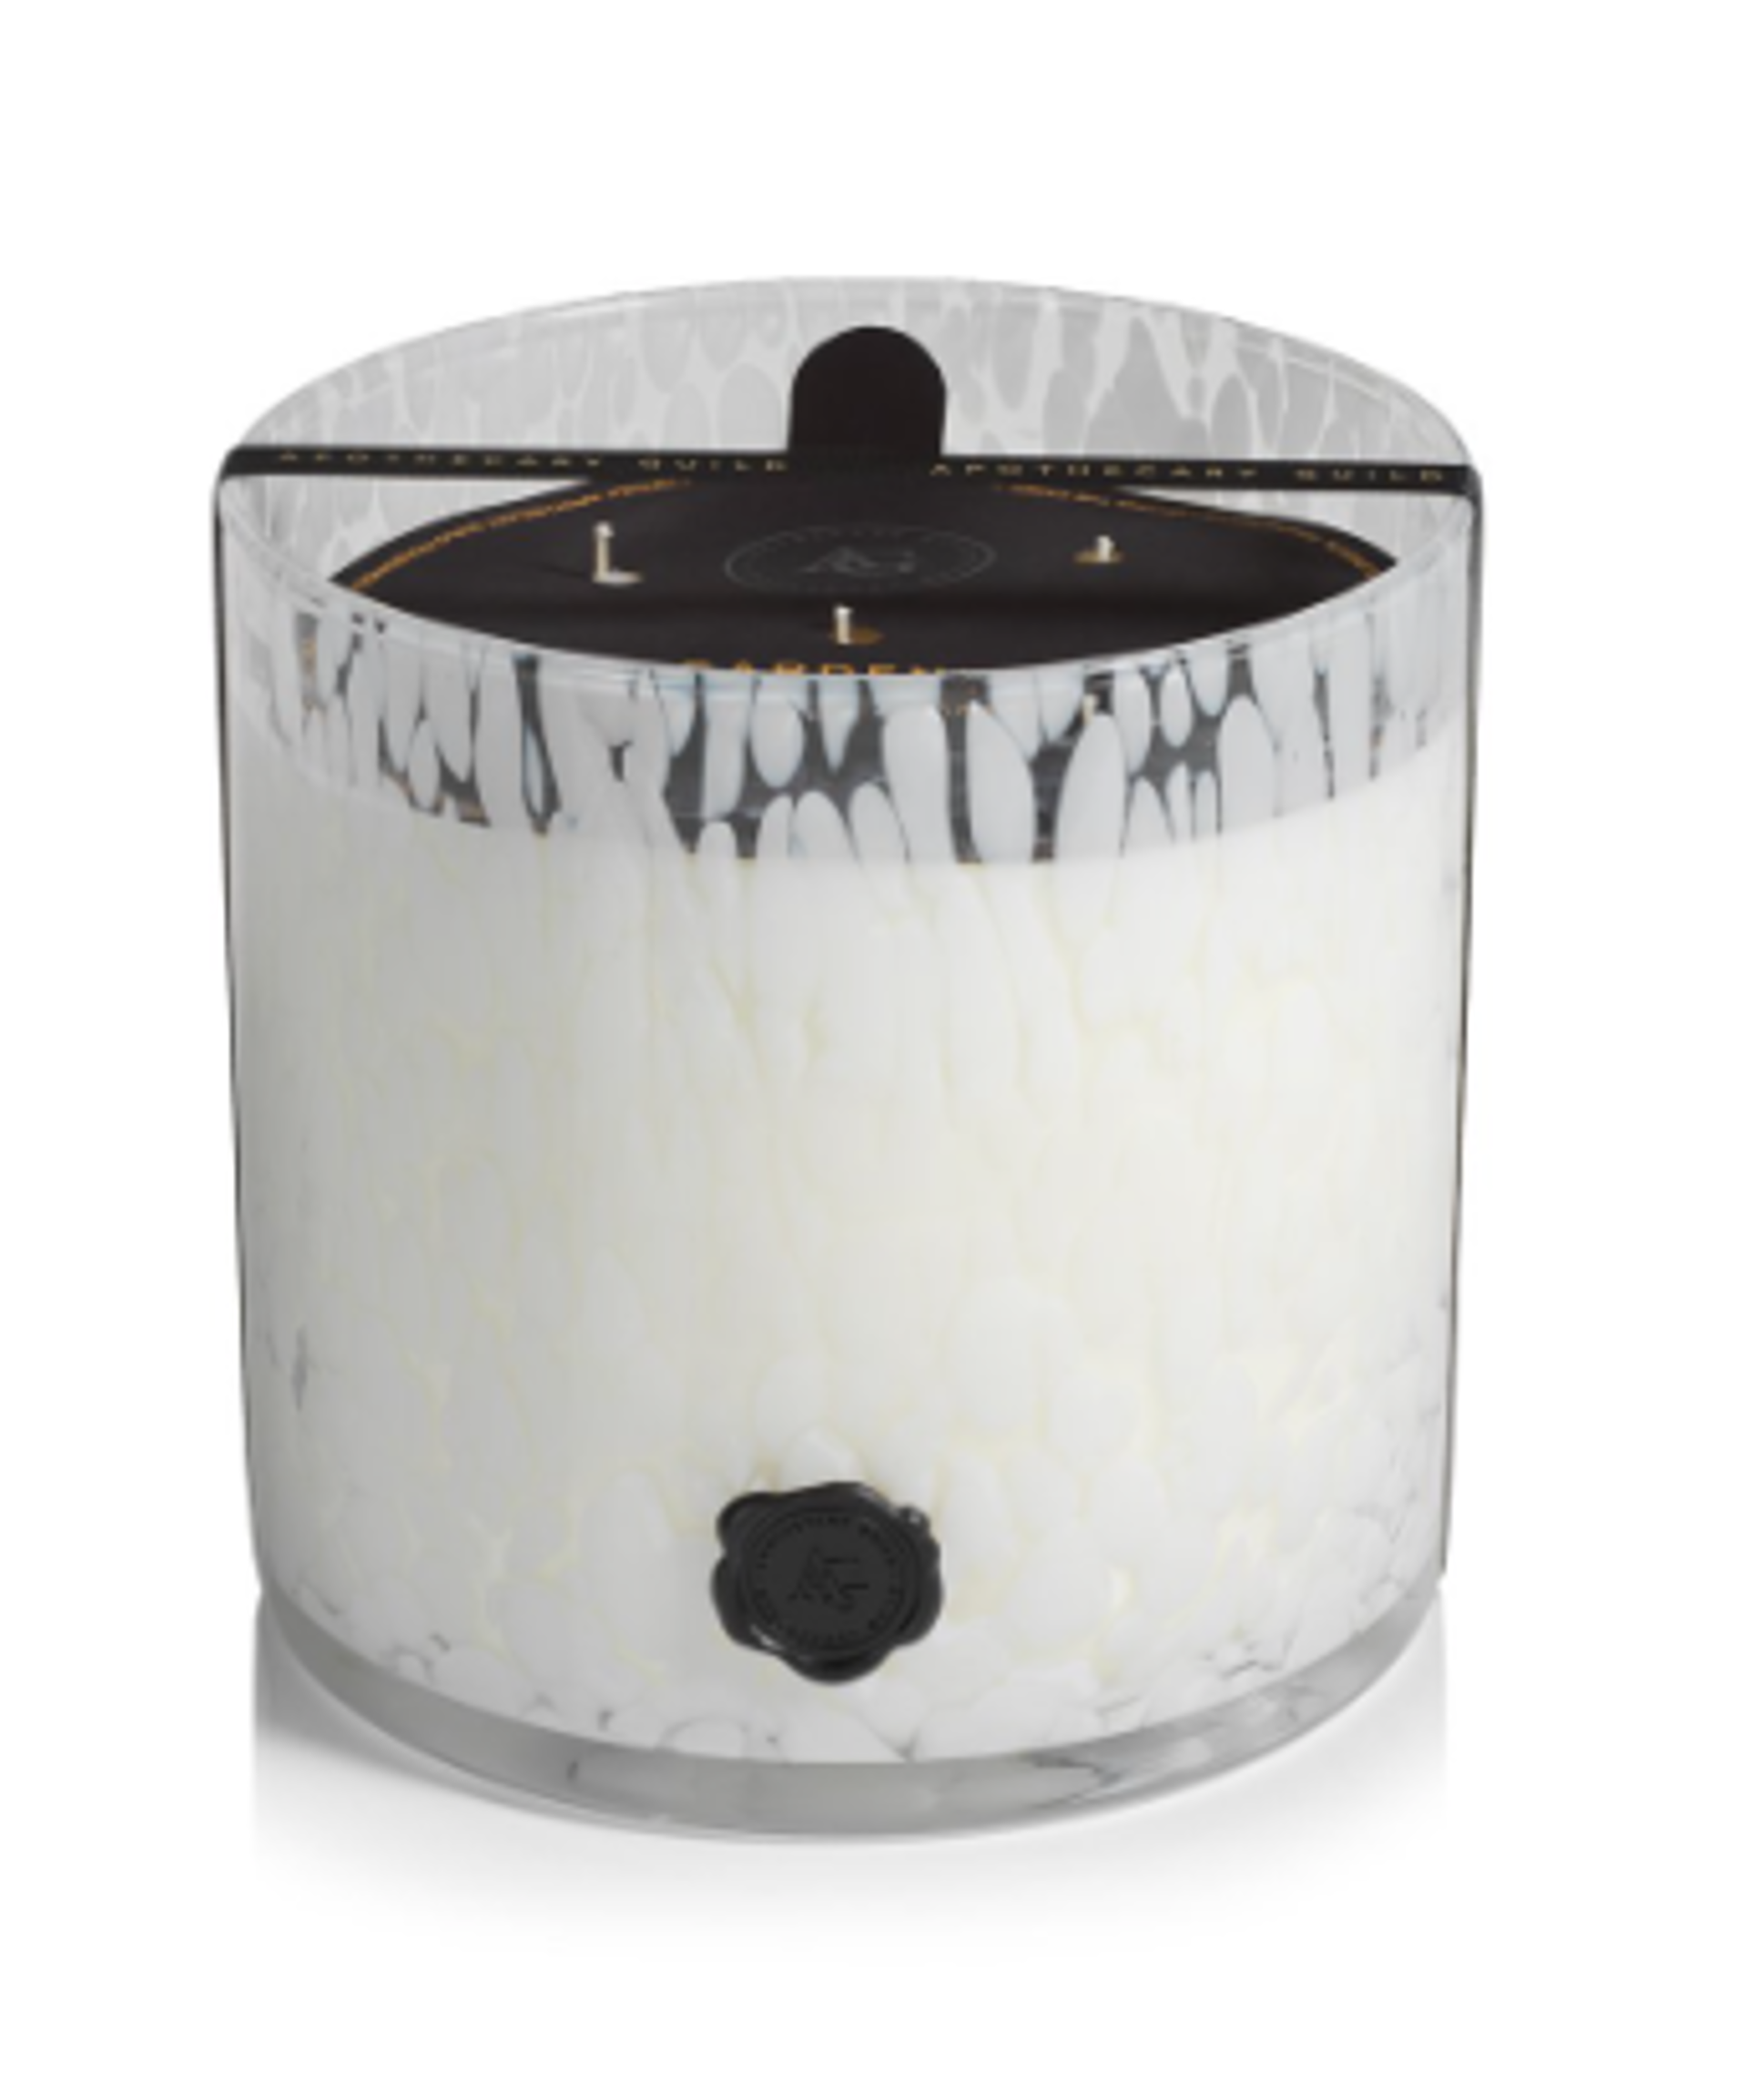 Opal Glass 5-Wick Candle - Gardenia by Argent